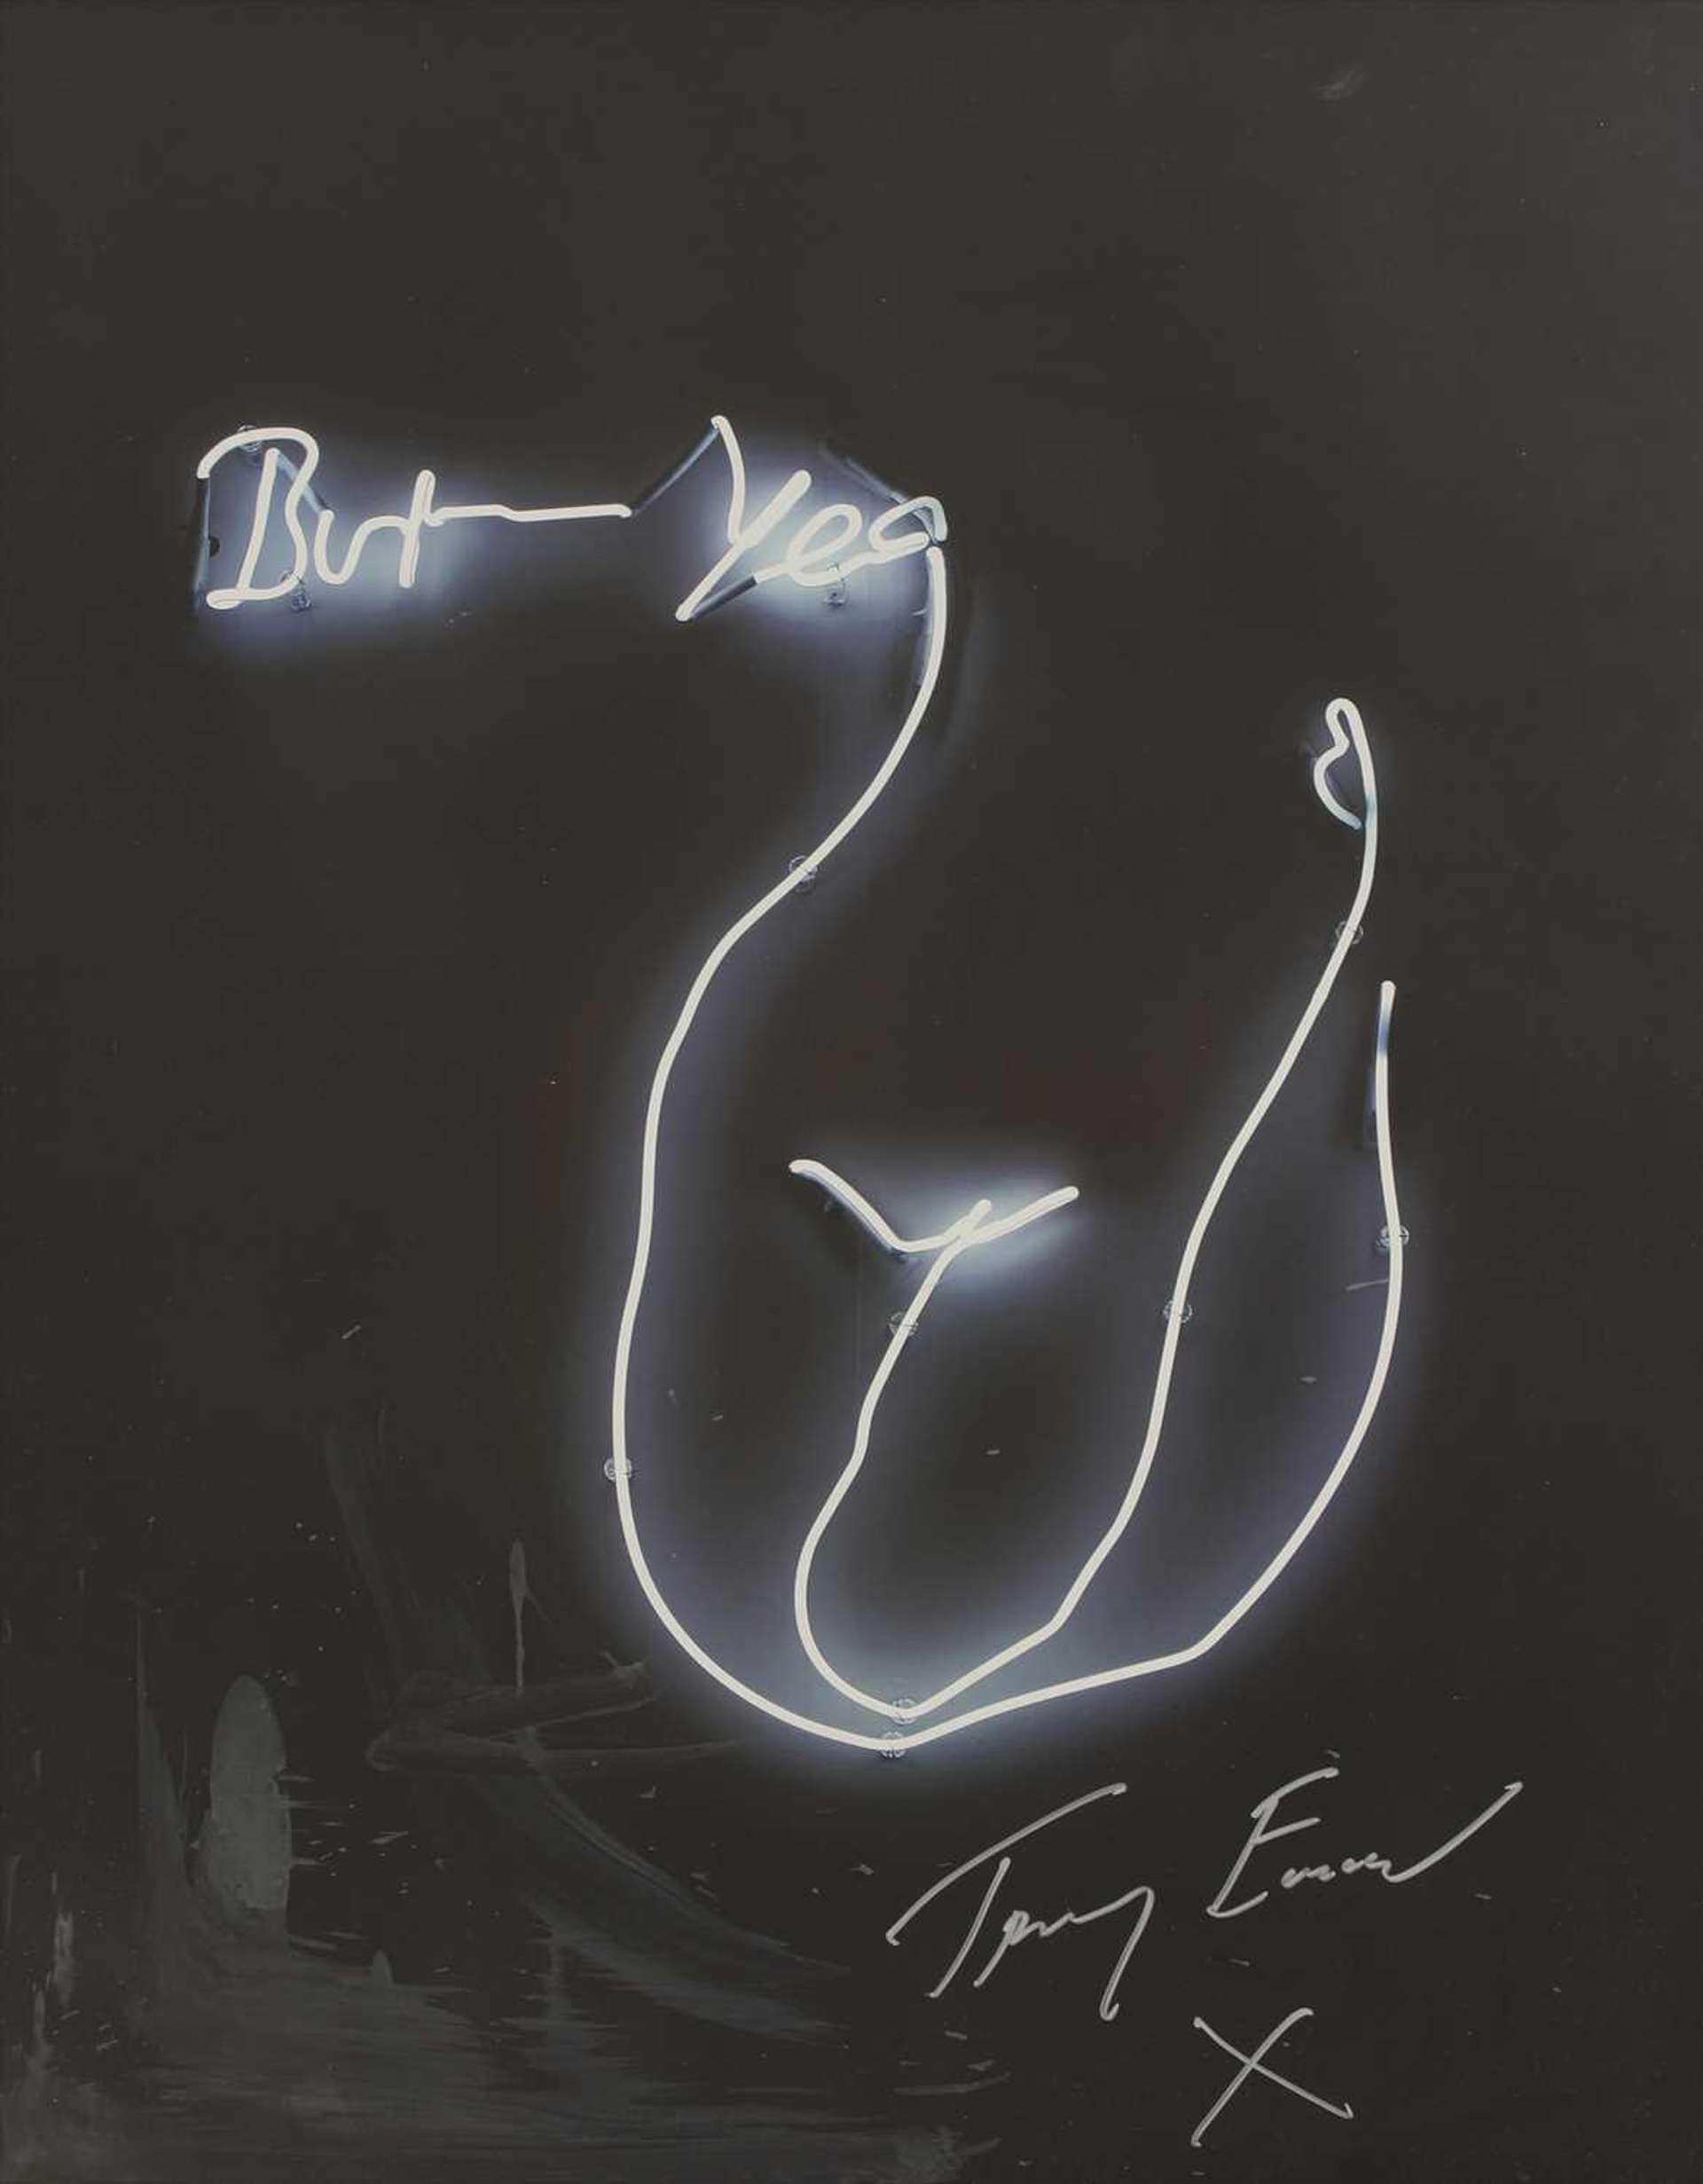 Tracey Emin: But Yea - Signed Print